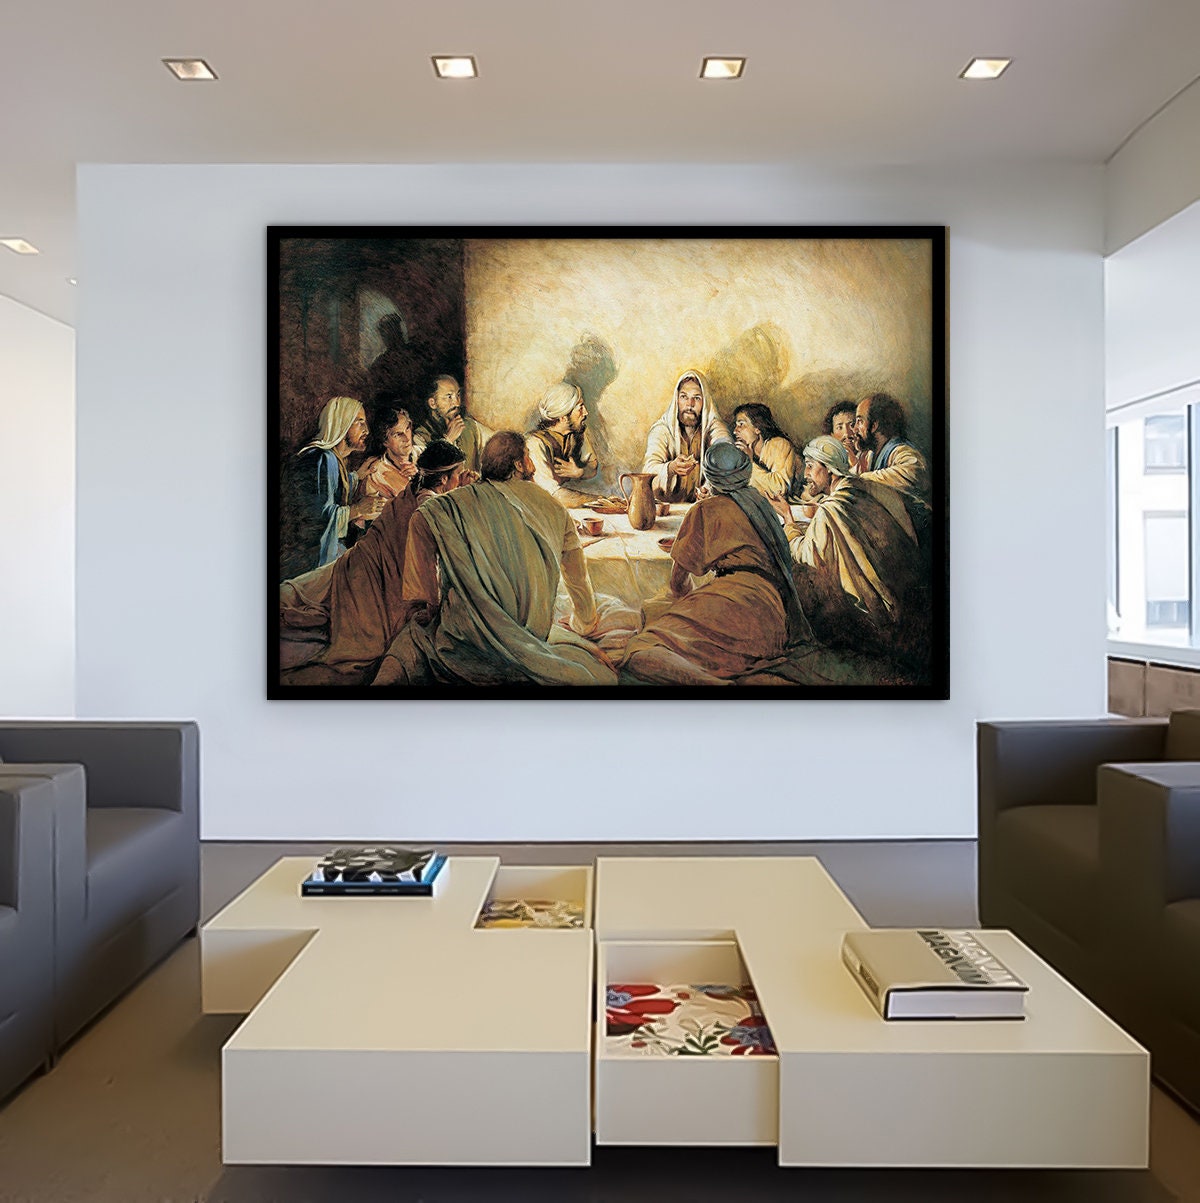 Home Decor Jesus Christ Wall Art The Last Supper Pictures Panel Canvas House Decorations Living Room Holy Communion Paintings Modern Artwork Framed - 2